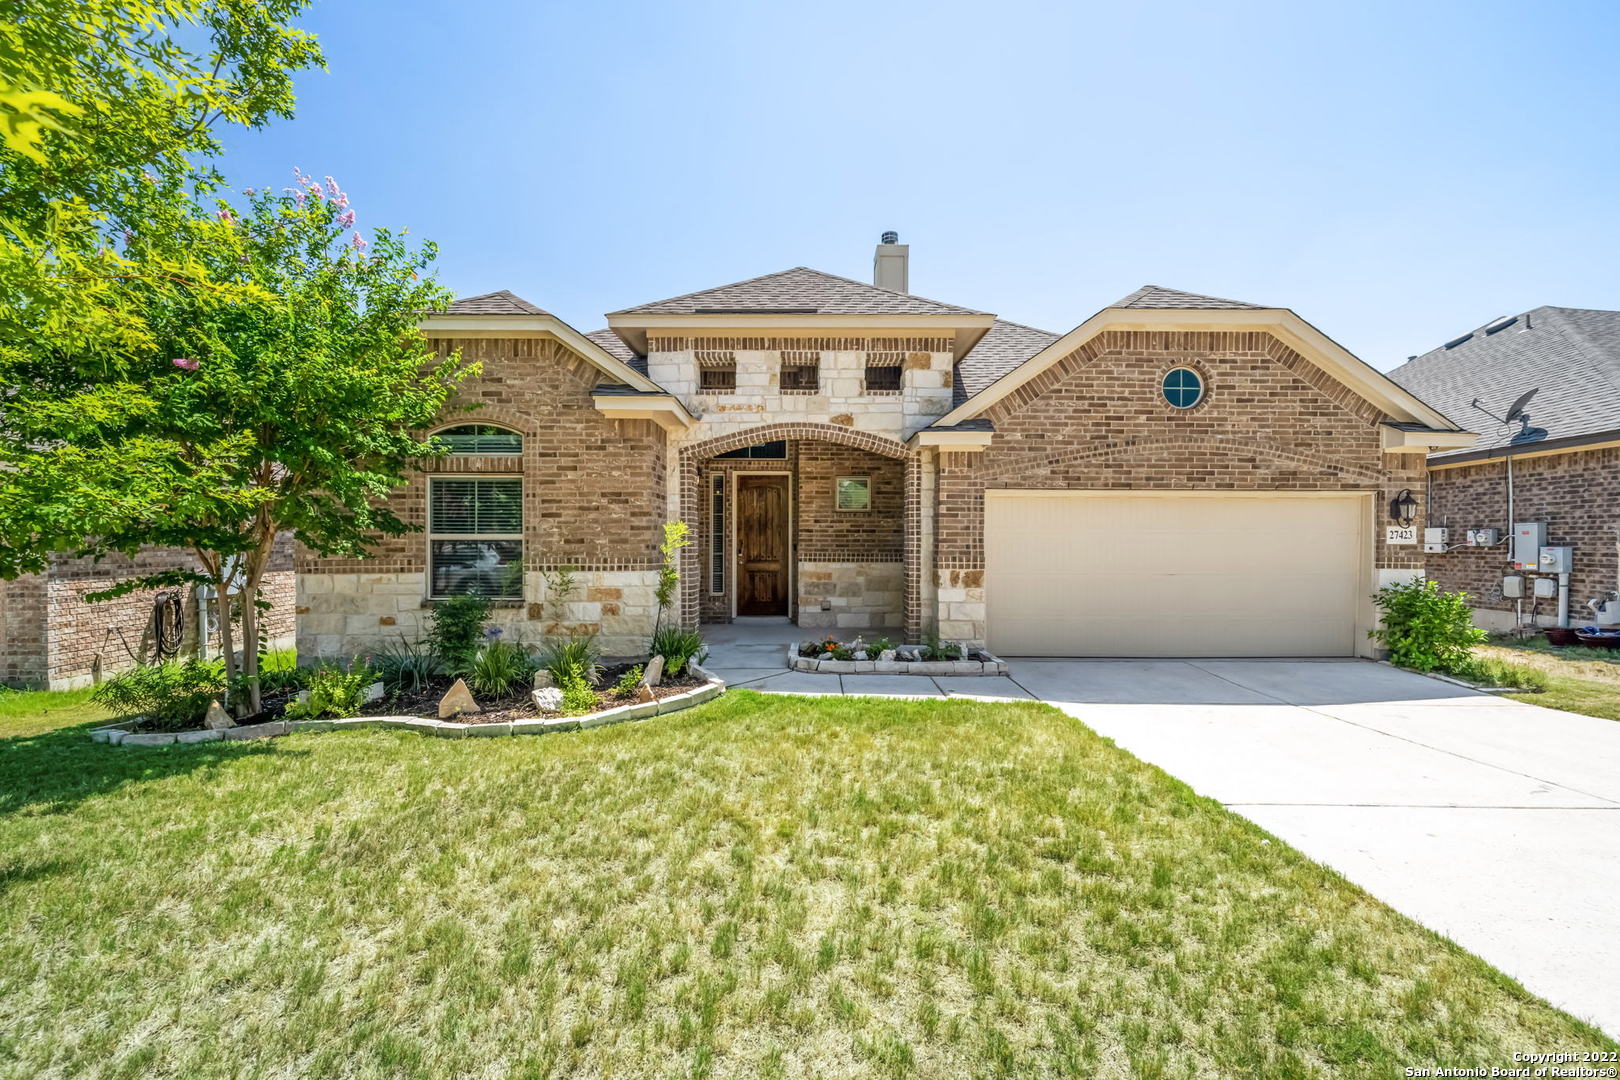 Looking for a turn-key home with a little bit of privacy? Here is the perfect opportunity! Welcome to 27423 Nichols Pass, a well maintained and stellar 1.5 story in the beautiful Boerne, TX. Float through the front door and be welcomed in with tall ceilings and ceramic tile floors leading you into an open concept living/kitchen area made complete with bay windows. Chat around the OVERSIZED granite kitchen island or cozy up next to the gas fireplace - The choice is yours! Nichols Pass has room for all guests with 4 bedrooms, 4 FULL bathrooms and no shared walls; That's right, no shared bedroom walls! The upstairs half story loft boasts privacy with a fourth bedroom and full bathroom; Perfect for those who love their own space. Backing up to a greenbelt and located in the highly sought after Boerne ISD school district, Nichols Pass is waiting for you to call it home! So what are you waiting for? Schedule a showing, for your own little piece of Boerne today!